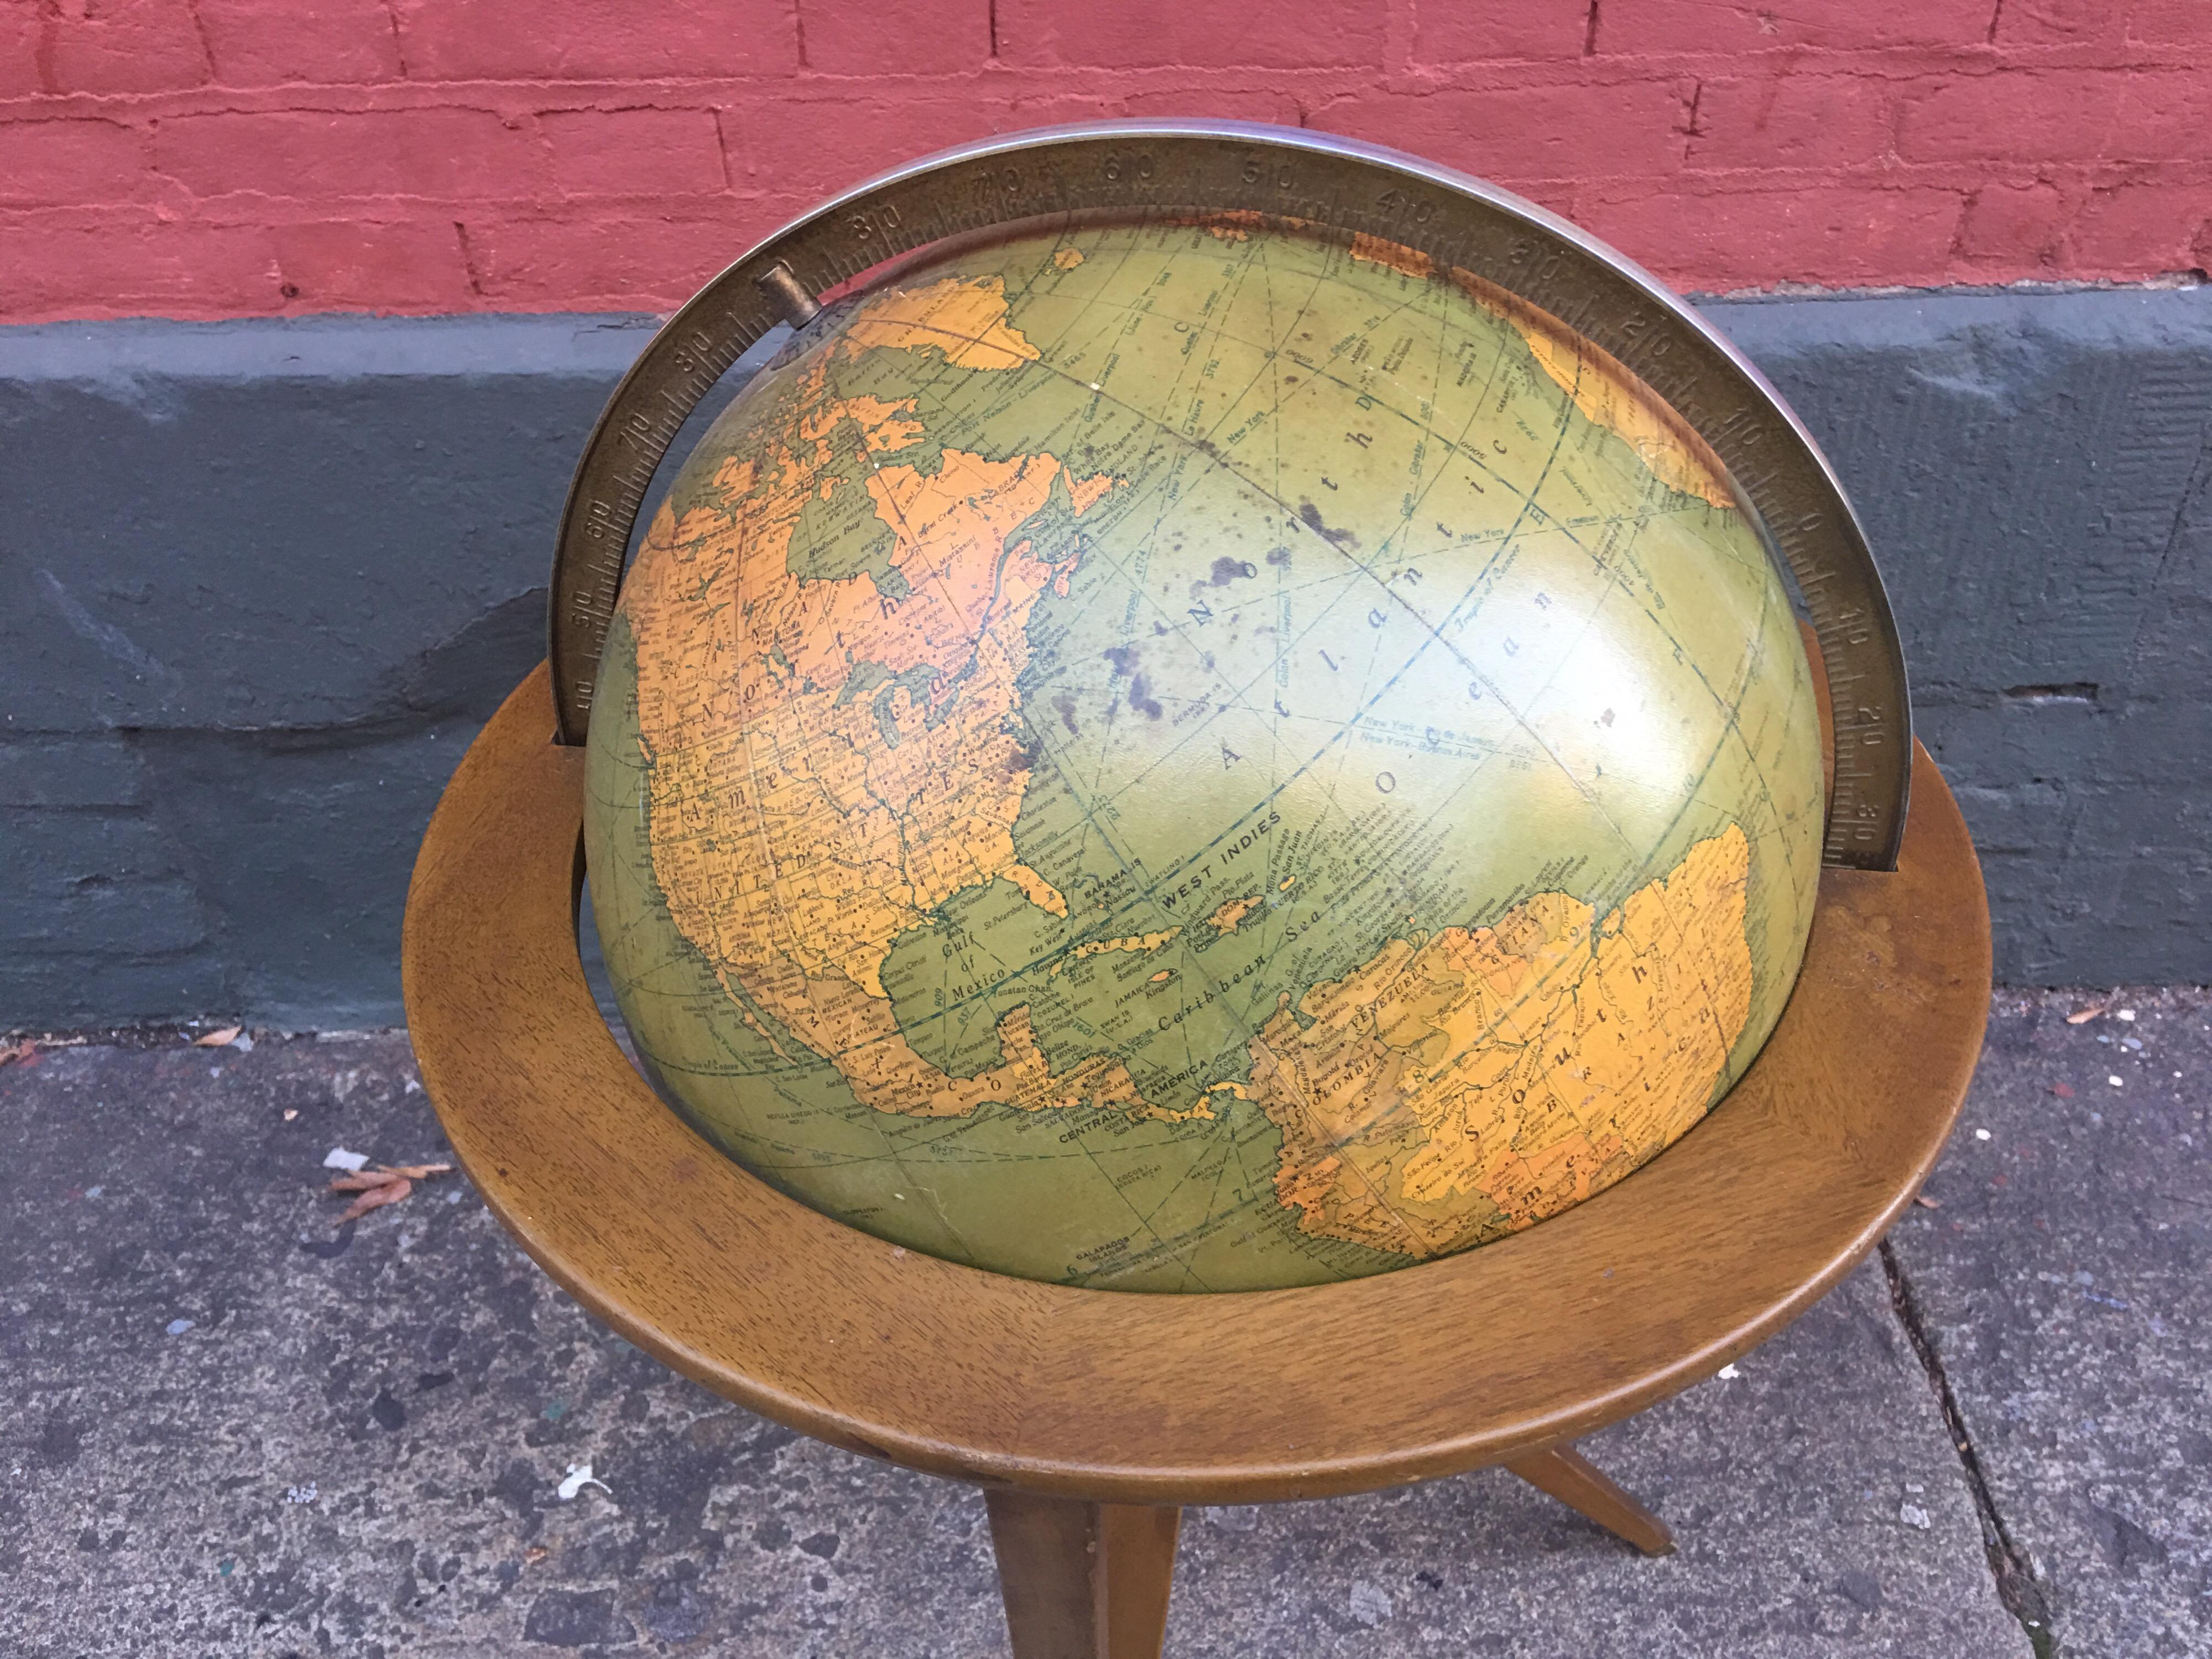 Edward Wormley Rand McNally World globe on stand. Paper over glass ball, globe spins and pivots in stand. Wood base has brass accents. Globe shows some slight staining and losses to bottom area/ south pole.